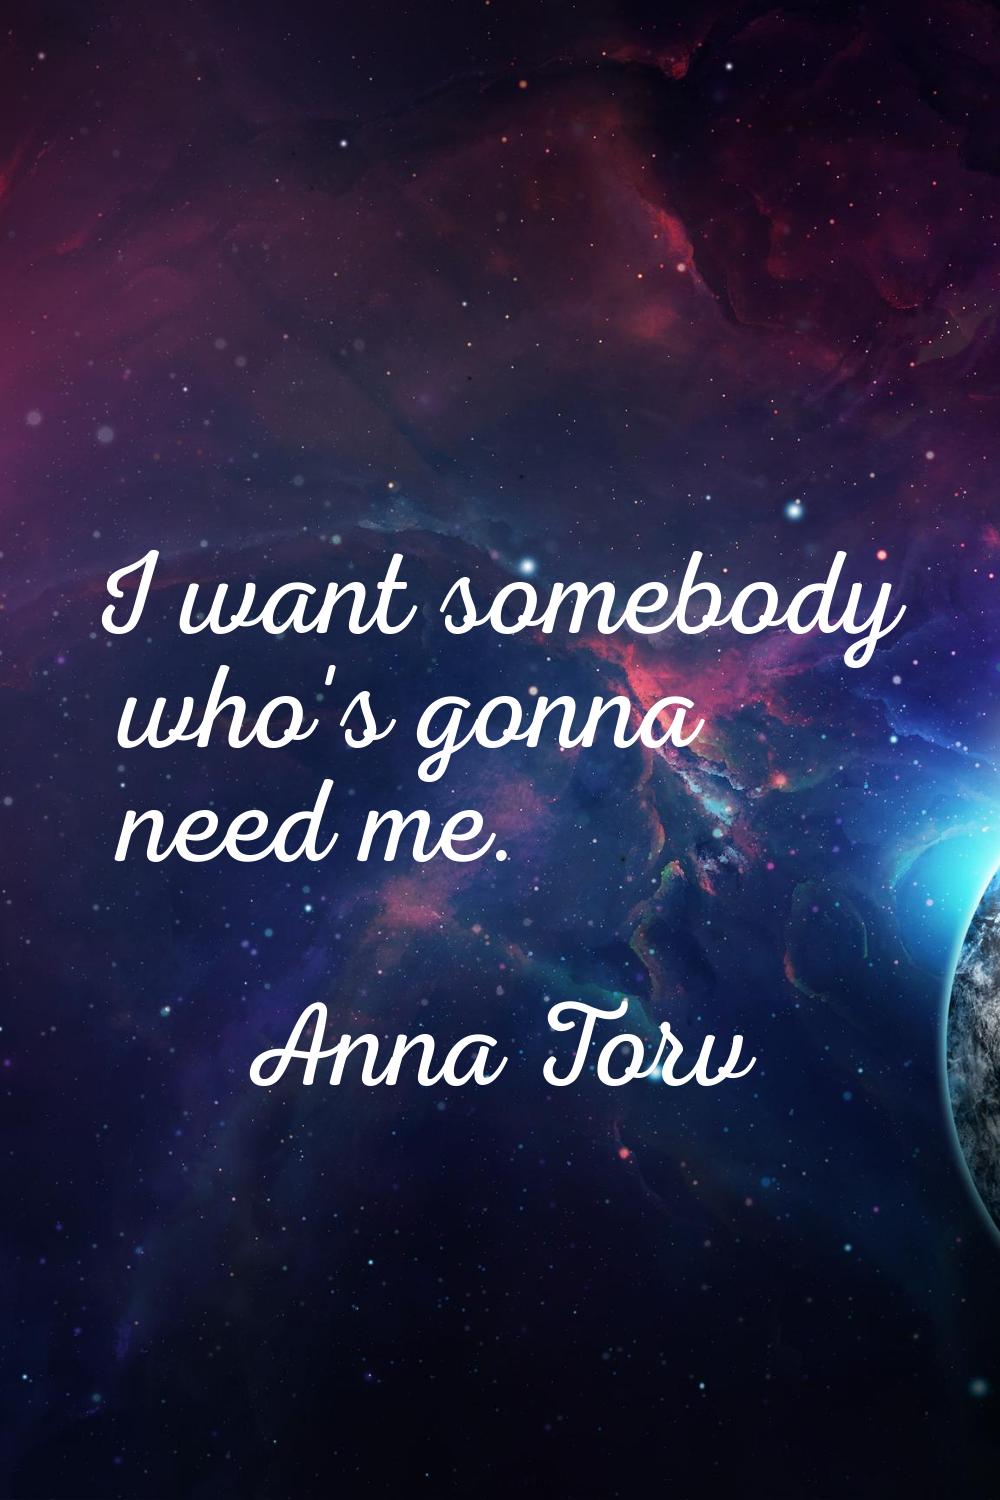 I want somebody who's gonna need me.